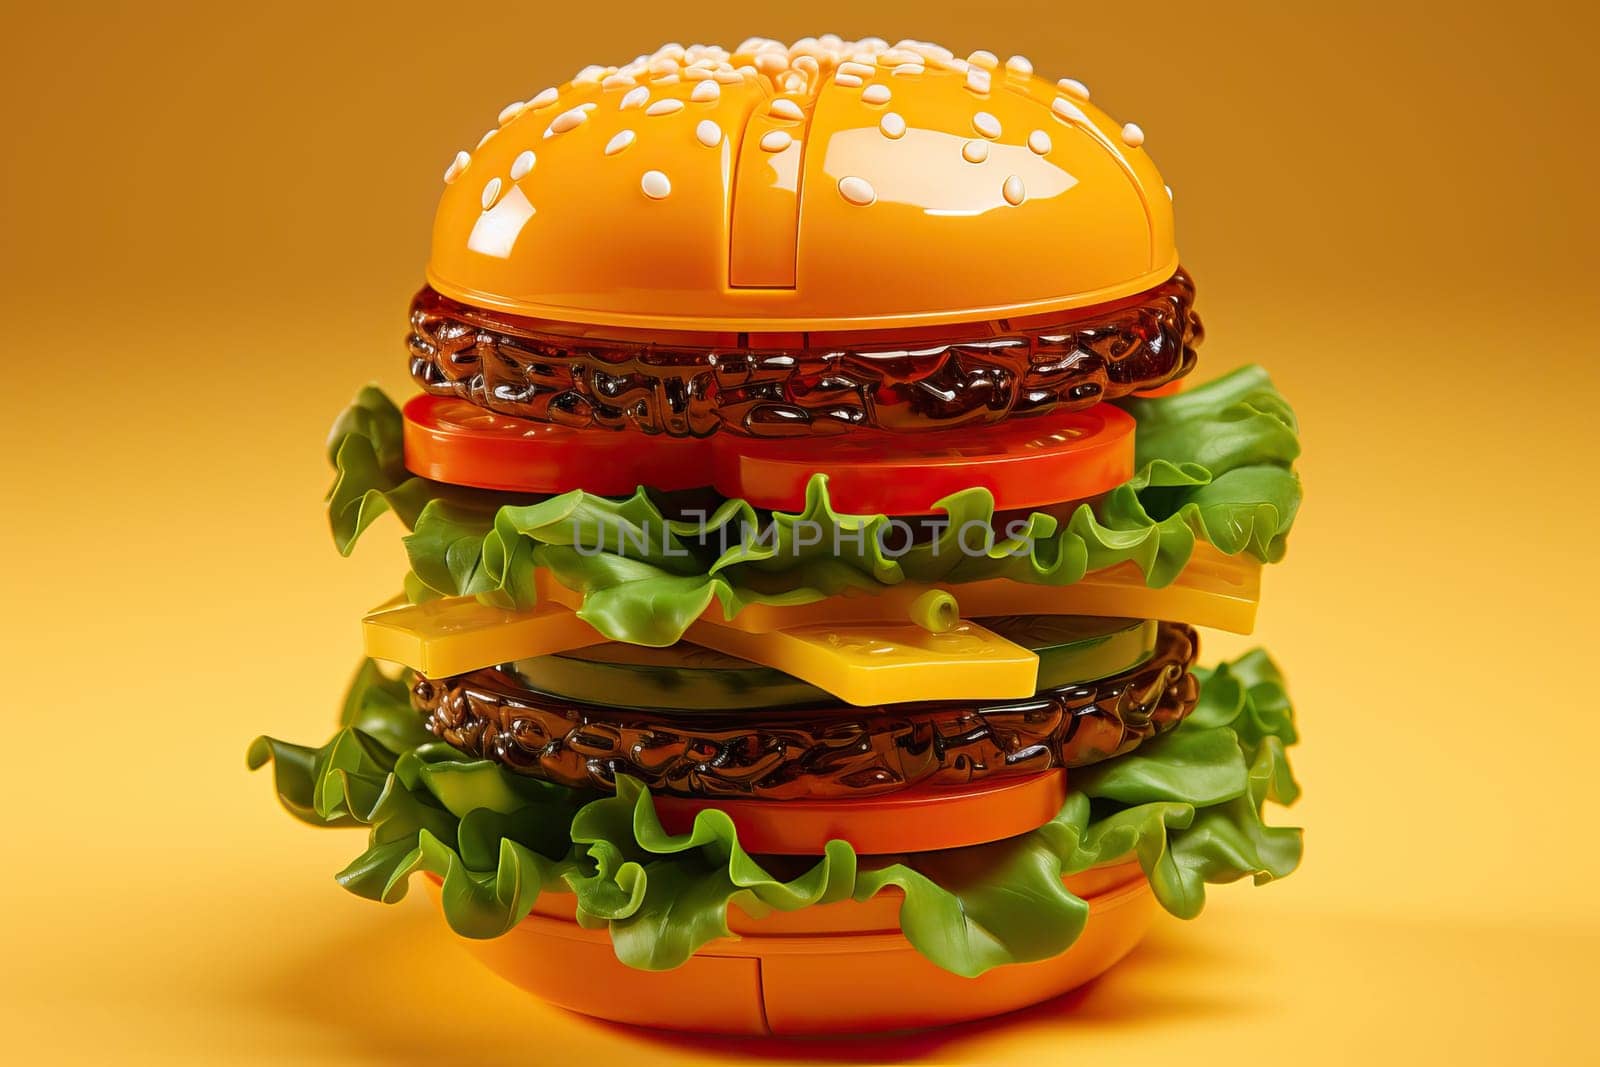 Plastic burger toy on a yellow background. by Niko_Cingaryuk